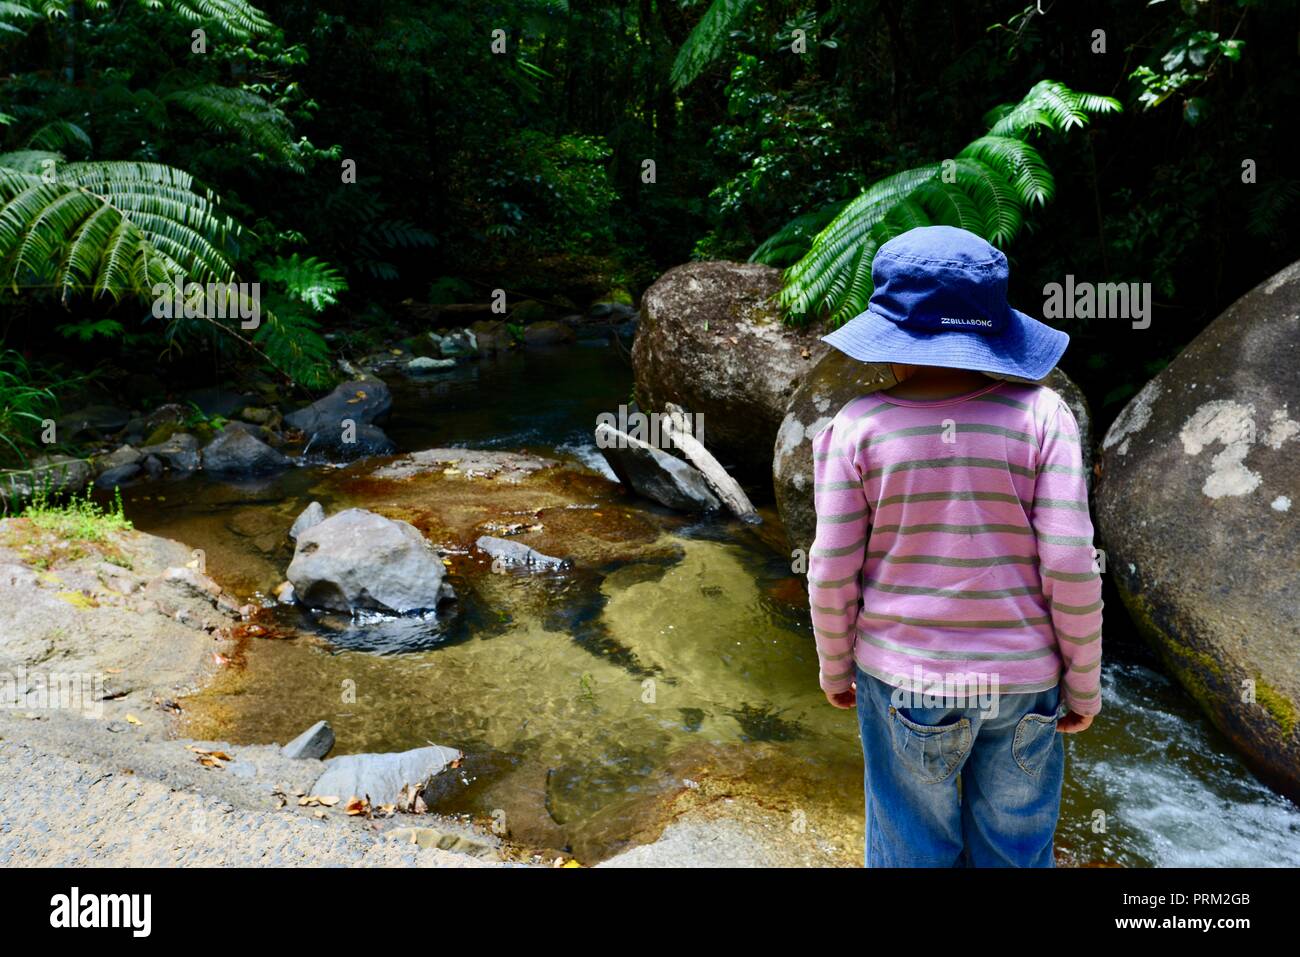 A young girl looking at a mountain stream, Misty Mountains wilderness tracks, Palmerston Doongan Wooroonooran National Park, Queensland, Australia Stock Photo